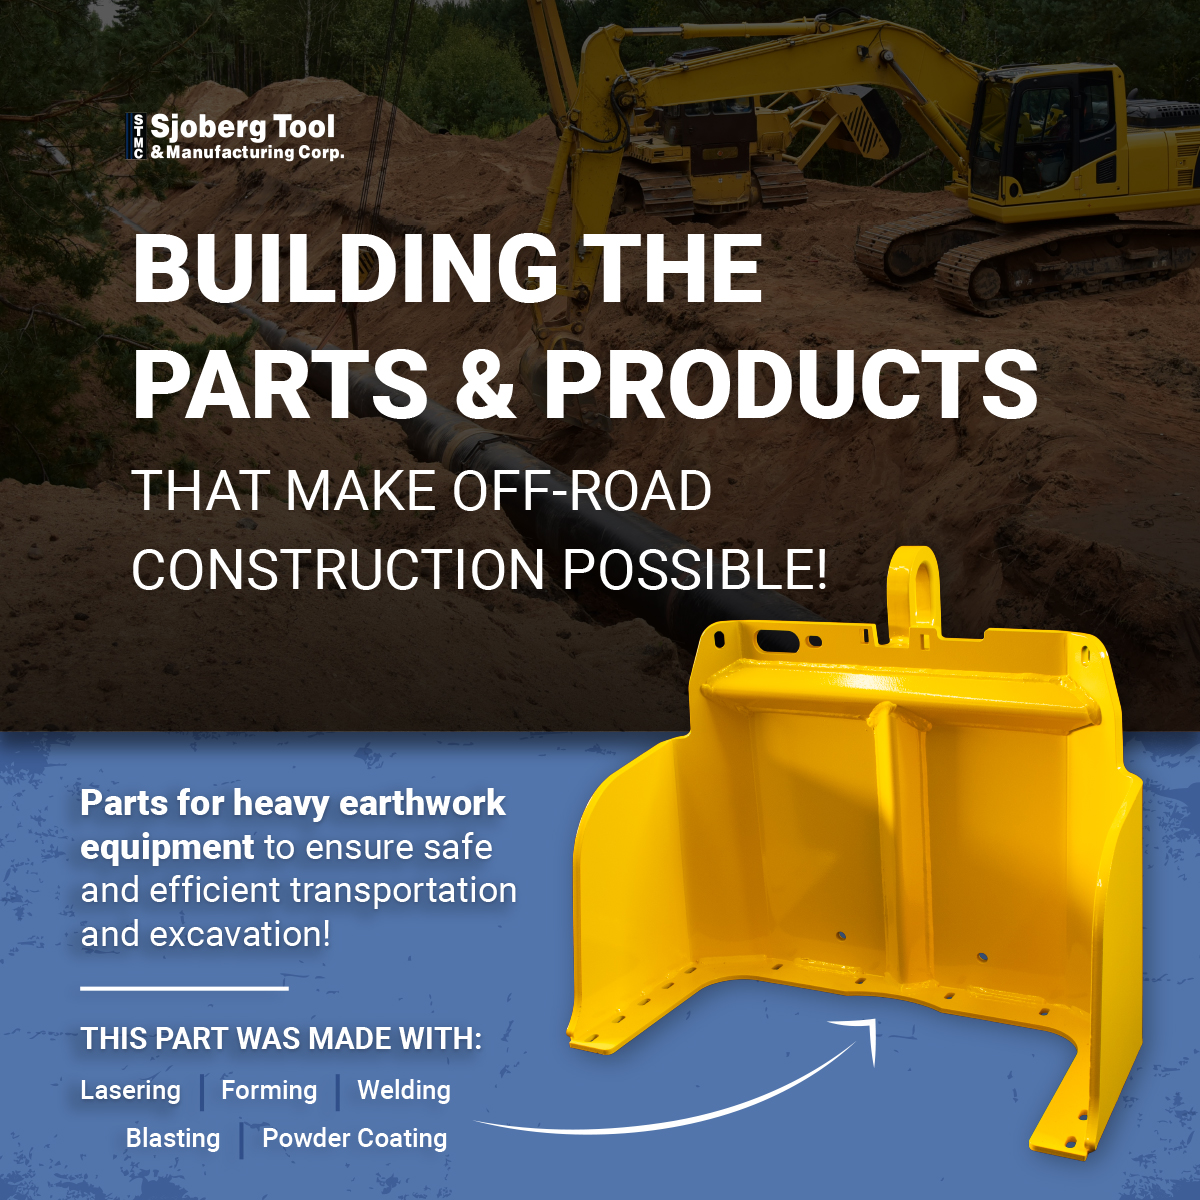 Building the Parts & Products That Make Off Road Construction Possible